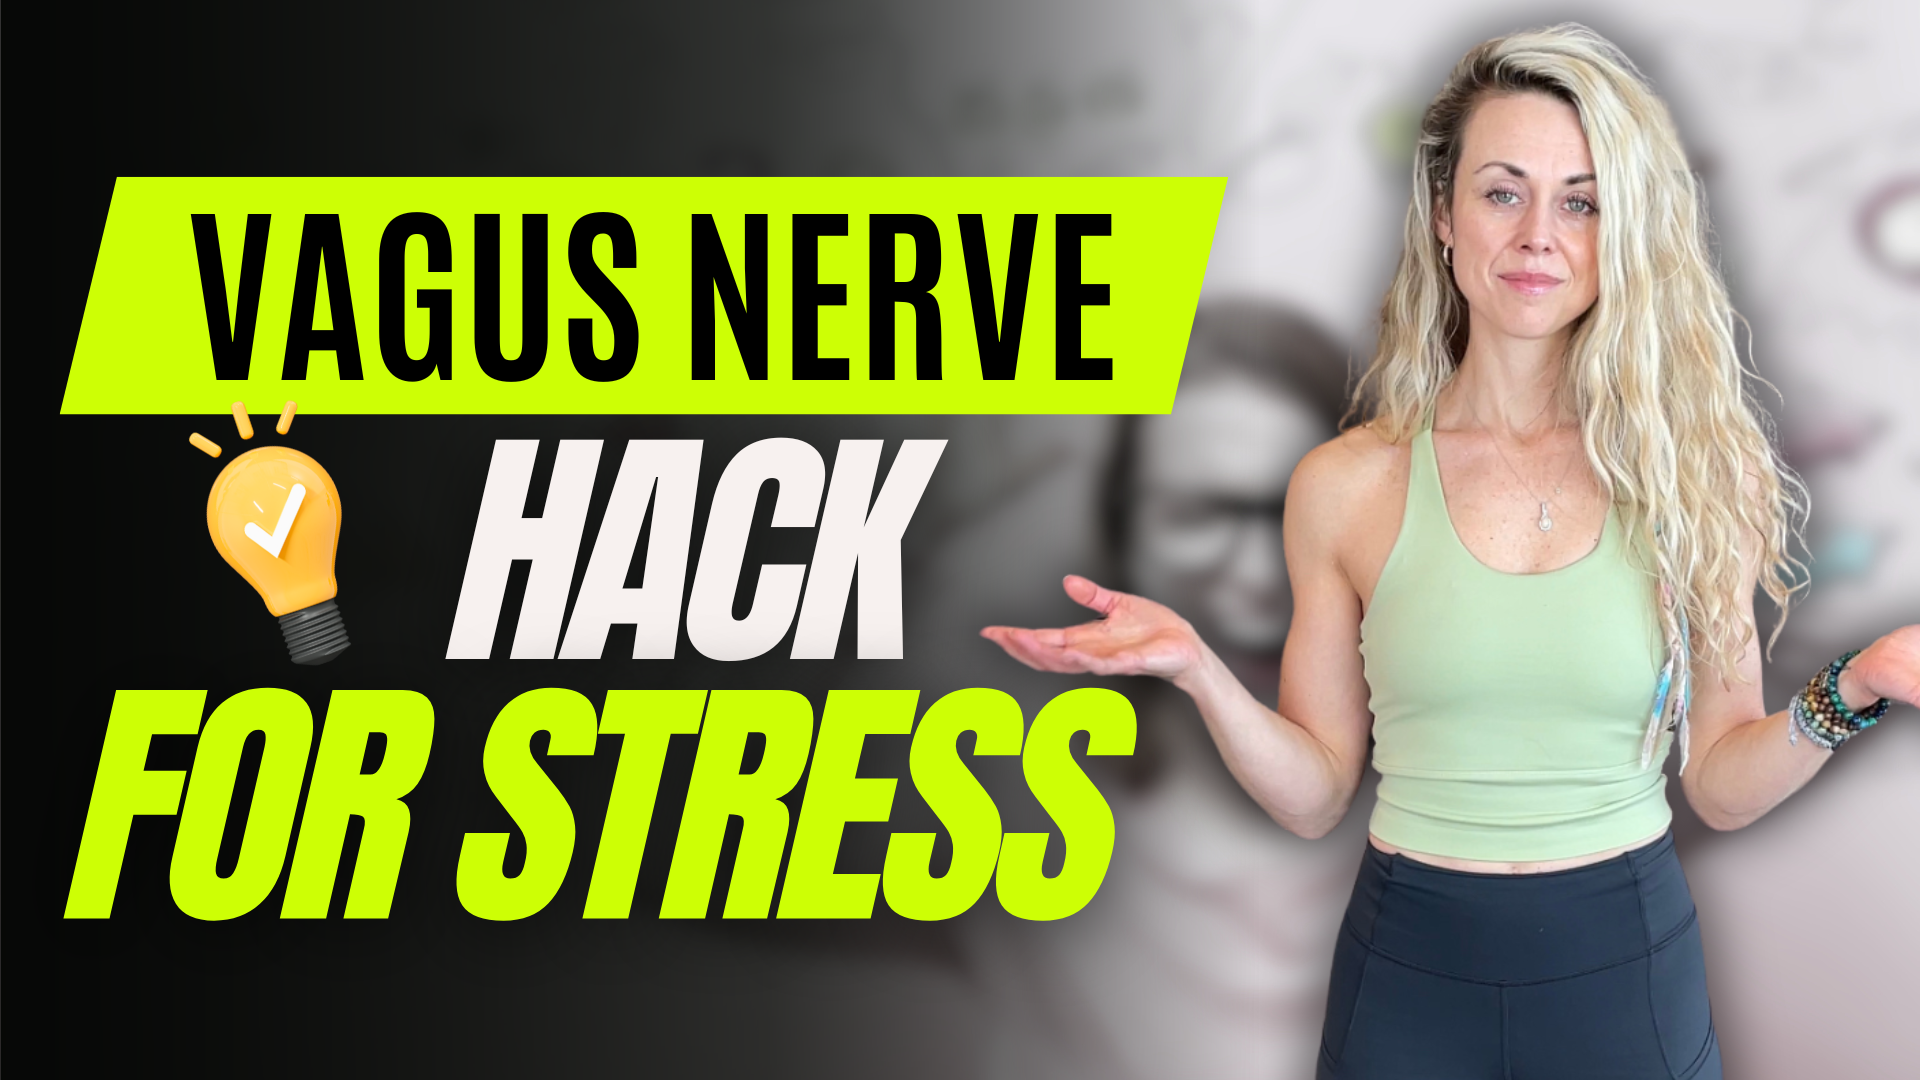 Vagus Nerve Hack for Stress Relief